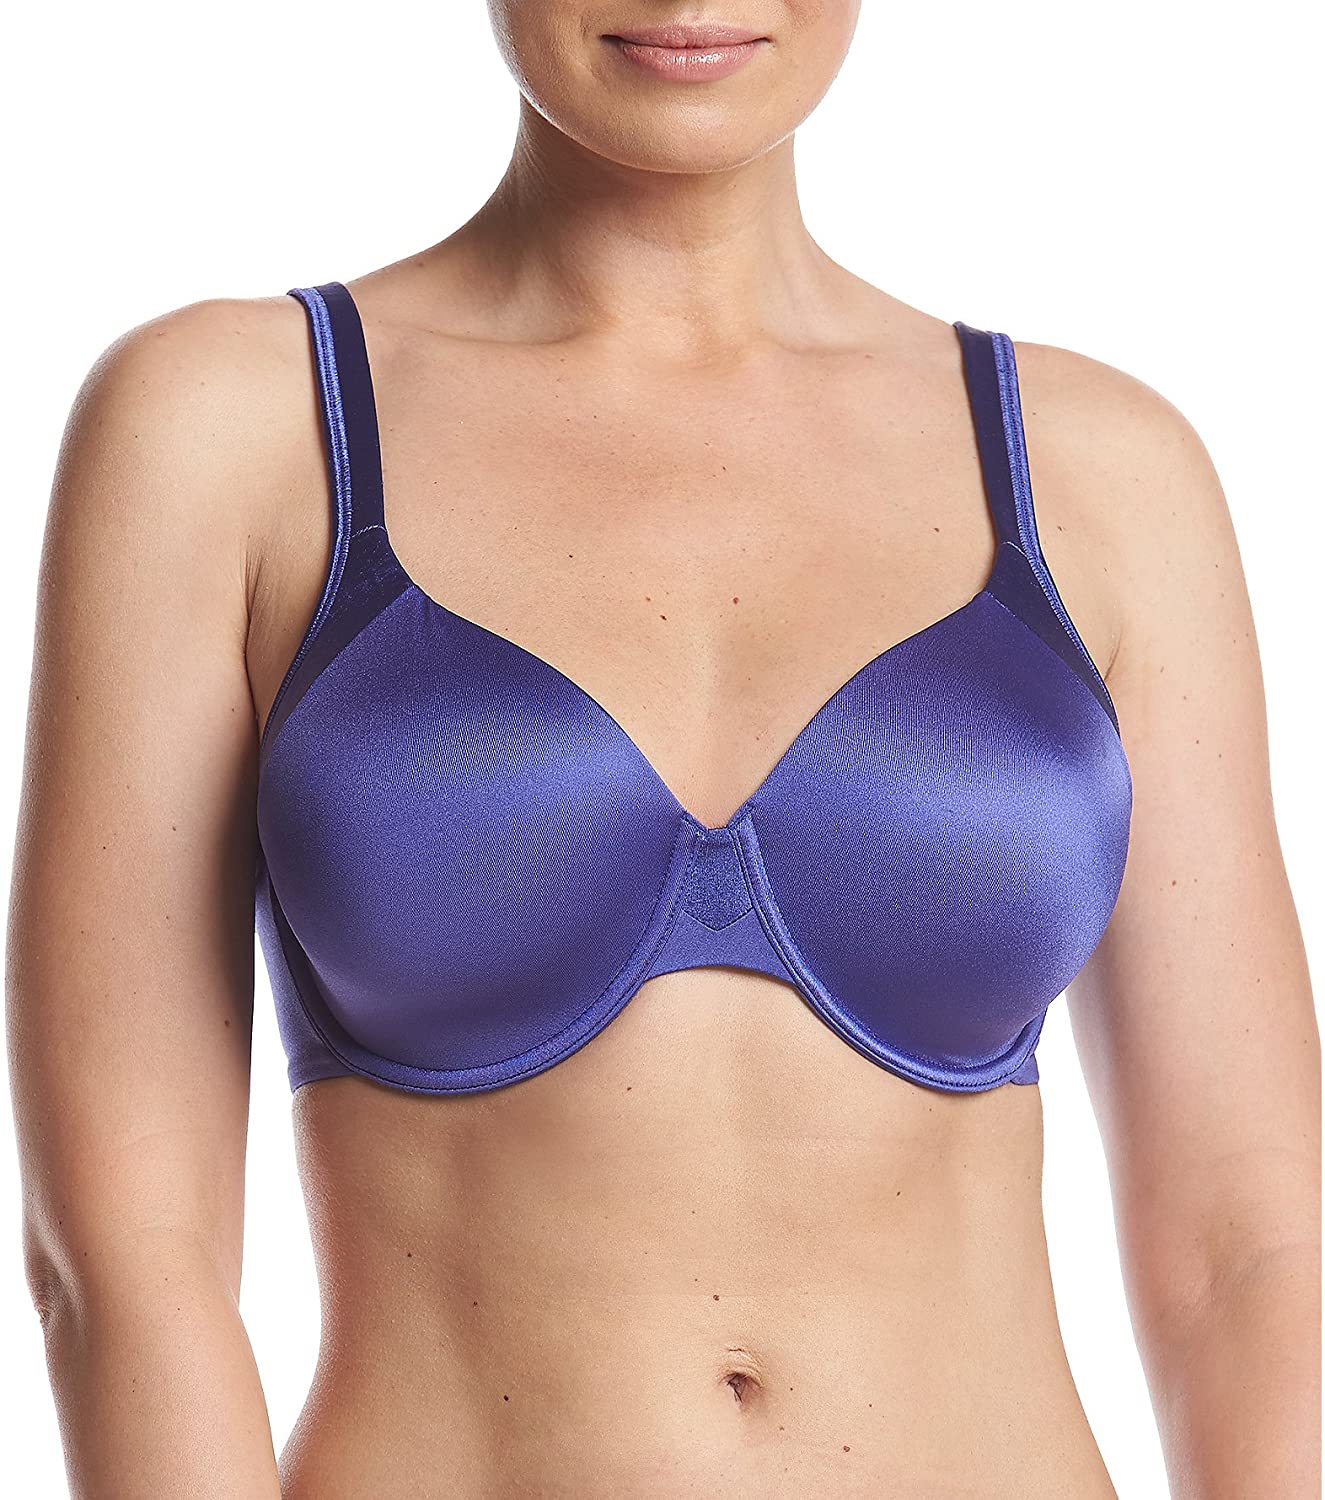 12 best bras for large busts herstylecode 2 12 Best Bras for Big Busts 2022 - Top Rated Bras for Bigger Busts